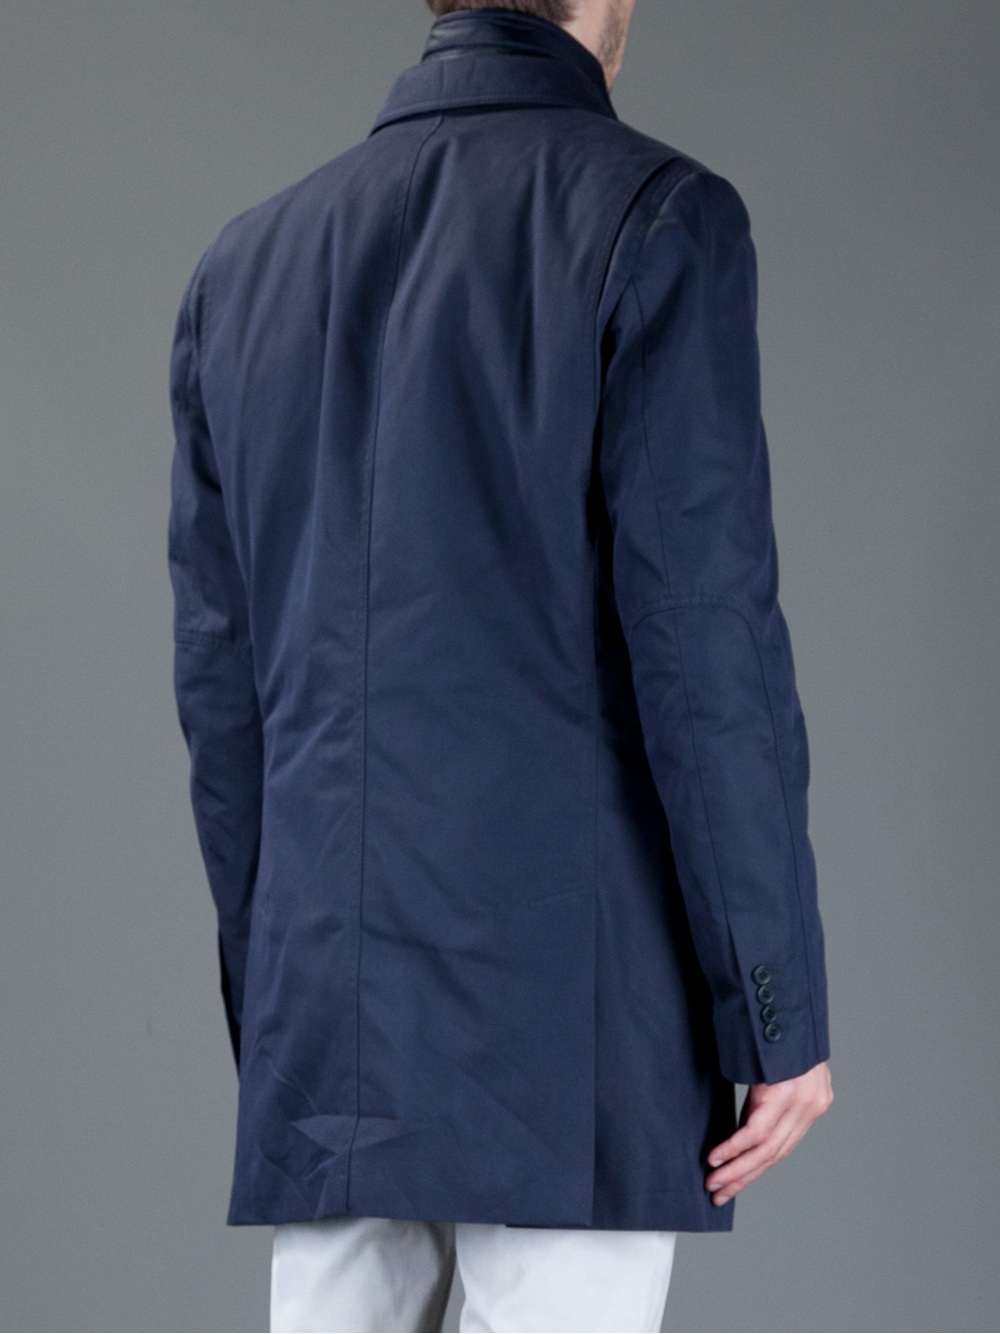 Fay Driving Coat in Blue for Men - Lyst